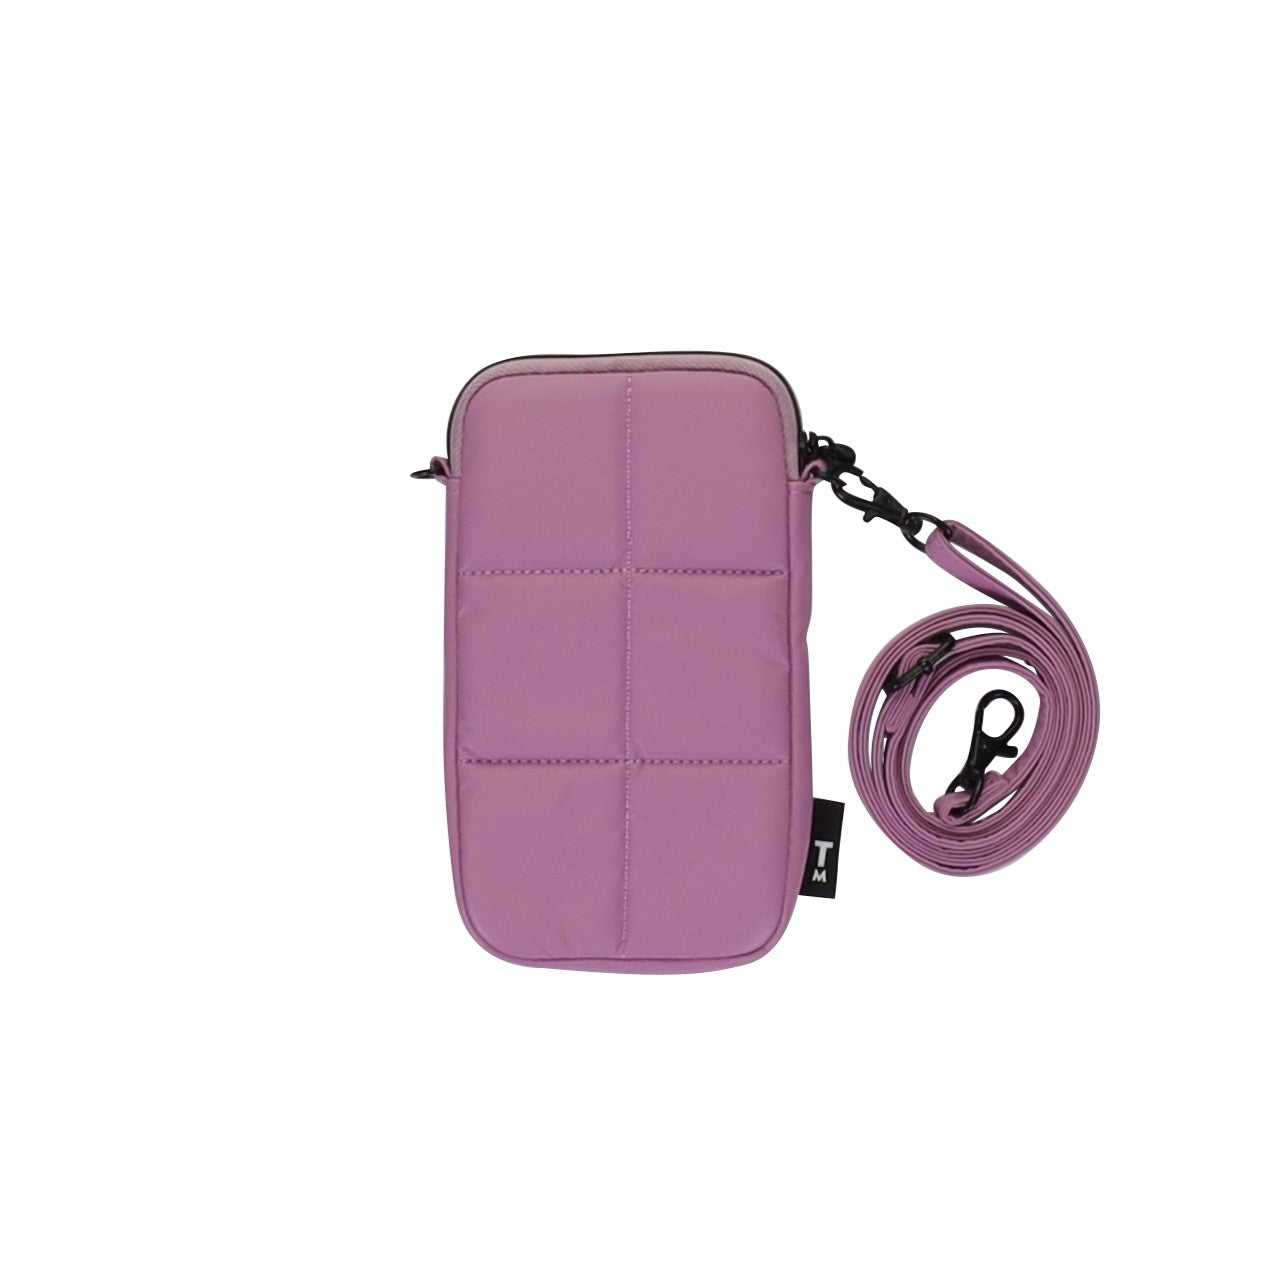 Puffy phone pouch in Cool Violet